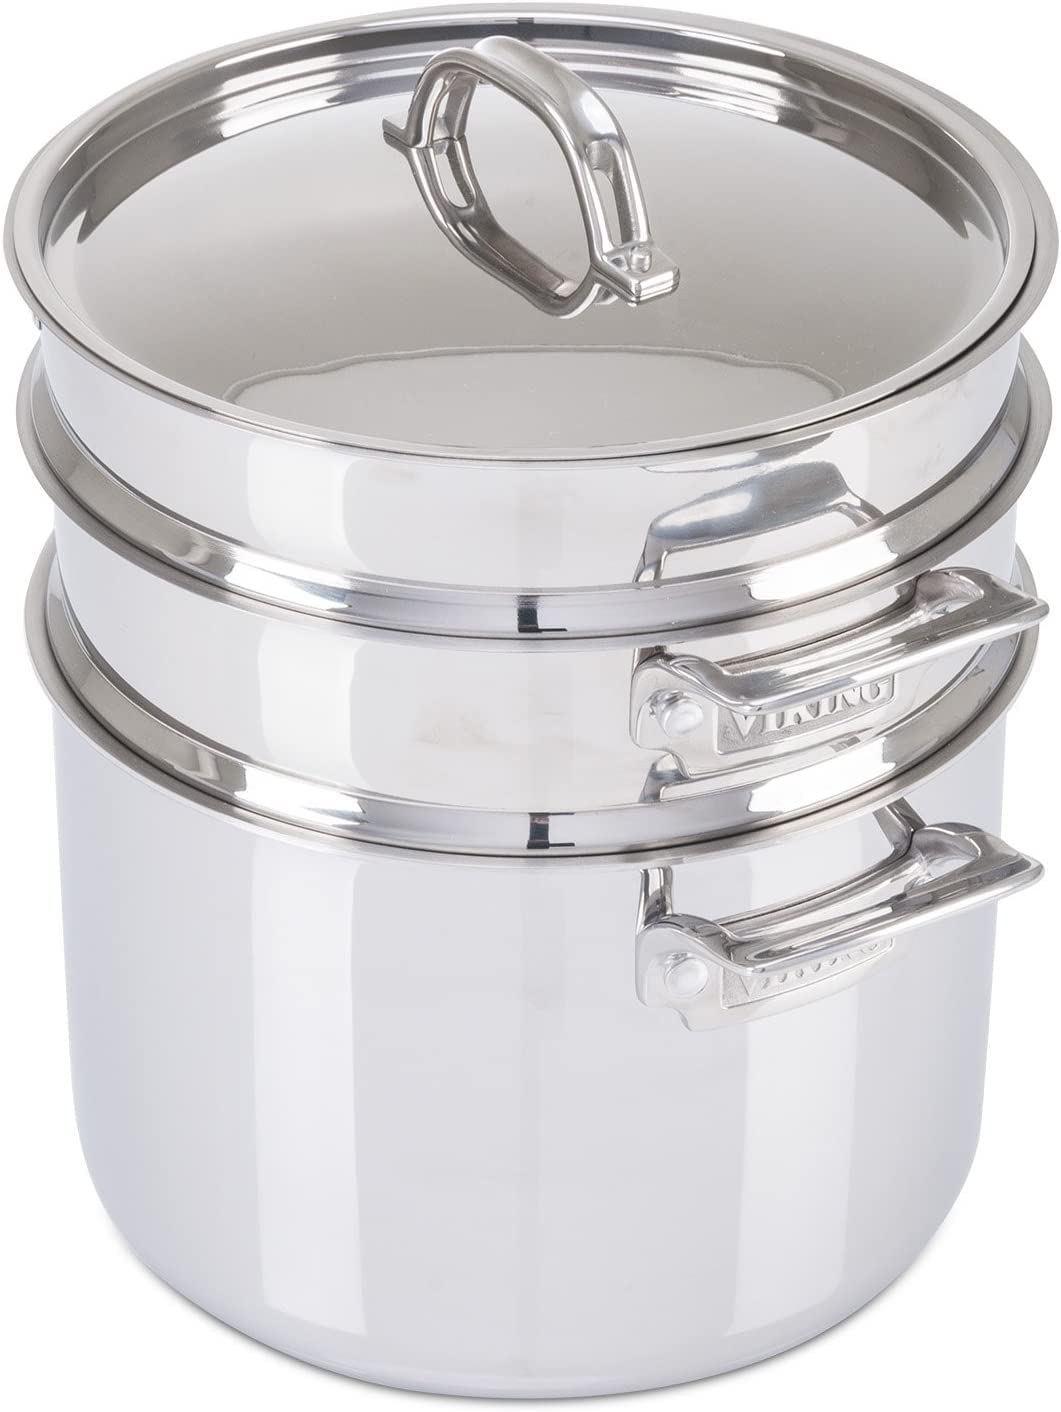 Viking Culinary 3-Ply Stainless Steel Pasta Pot, 8 Quart, Includes Pasta & Steamer Insert, Dishwasher, Oven Safe, Works on All Cooktops including Induction